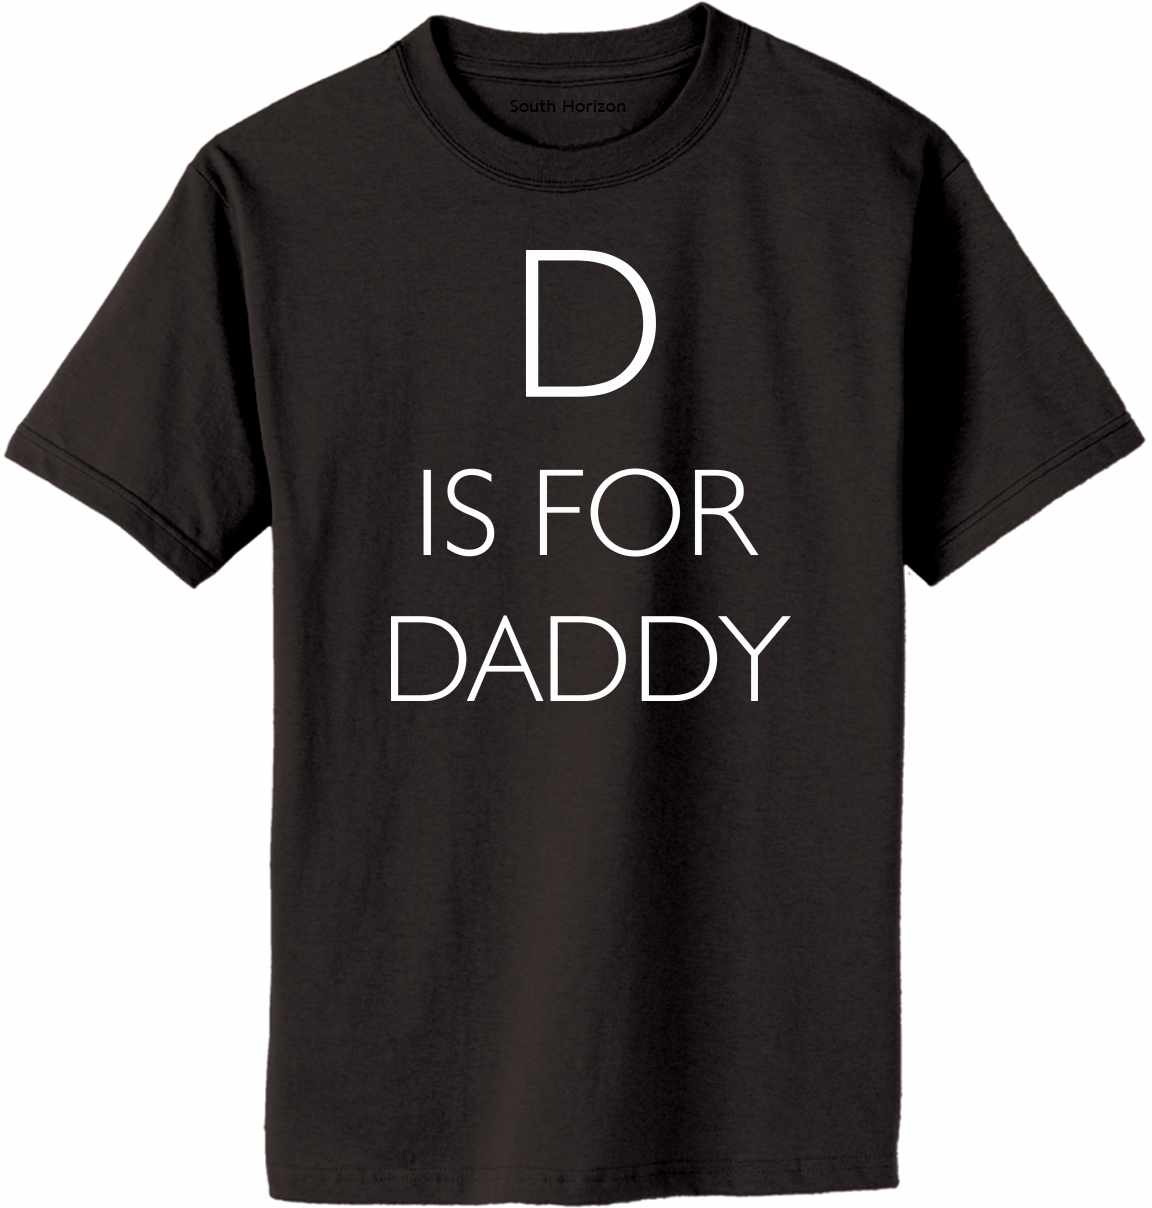 D is for Daddy on Adult T-Shirt (#1208-1)